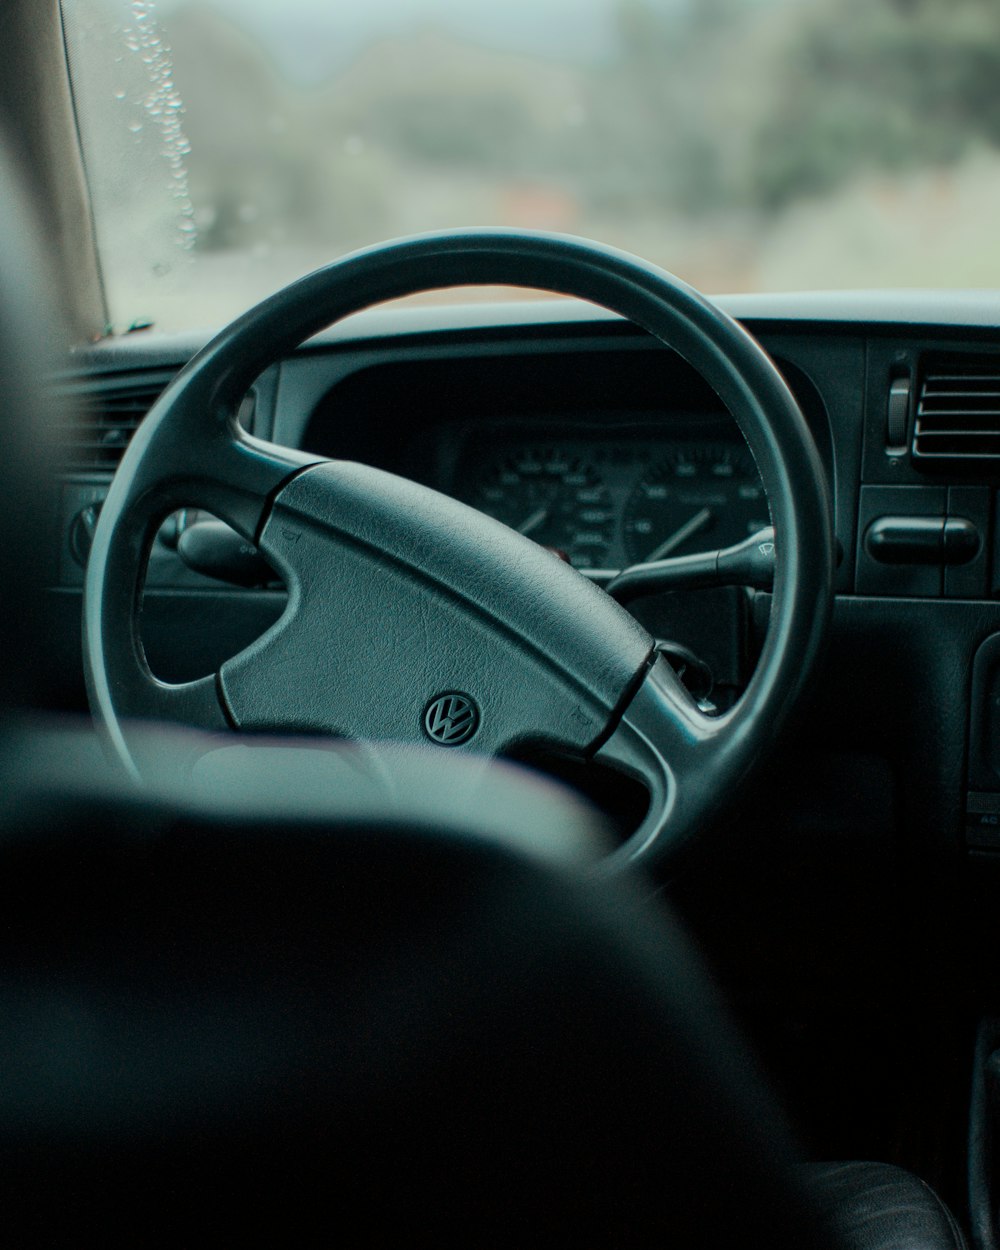 the dashboard of a car with a steering wheel